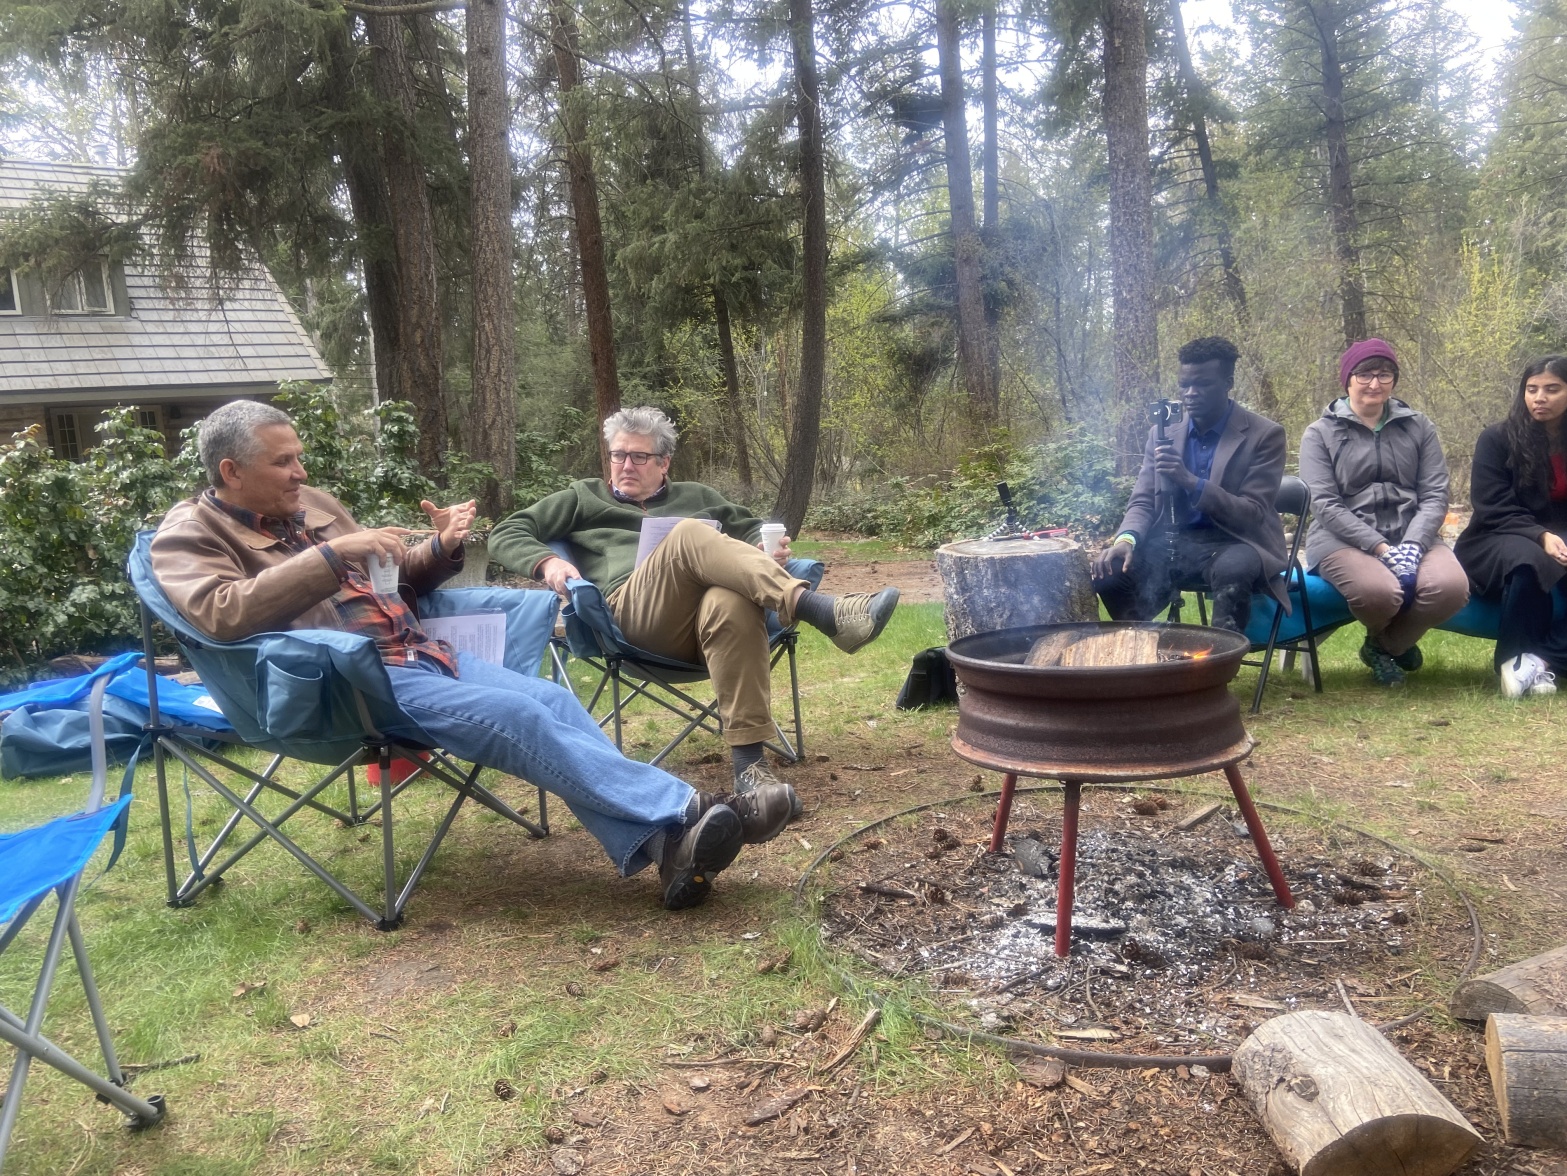 A number of individuals sit around a campfire. Two are in conversation, one films, and others listen. Trees and part of a building are in the background.